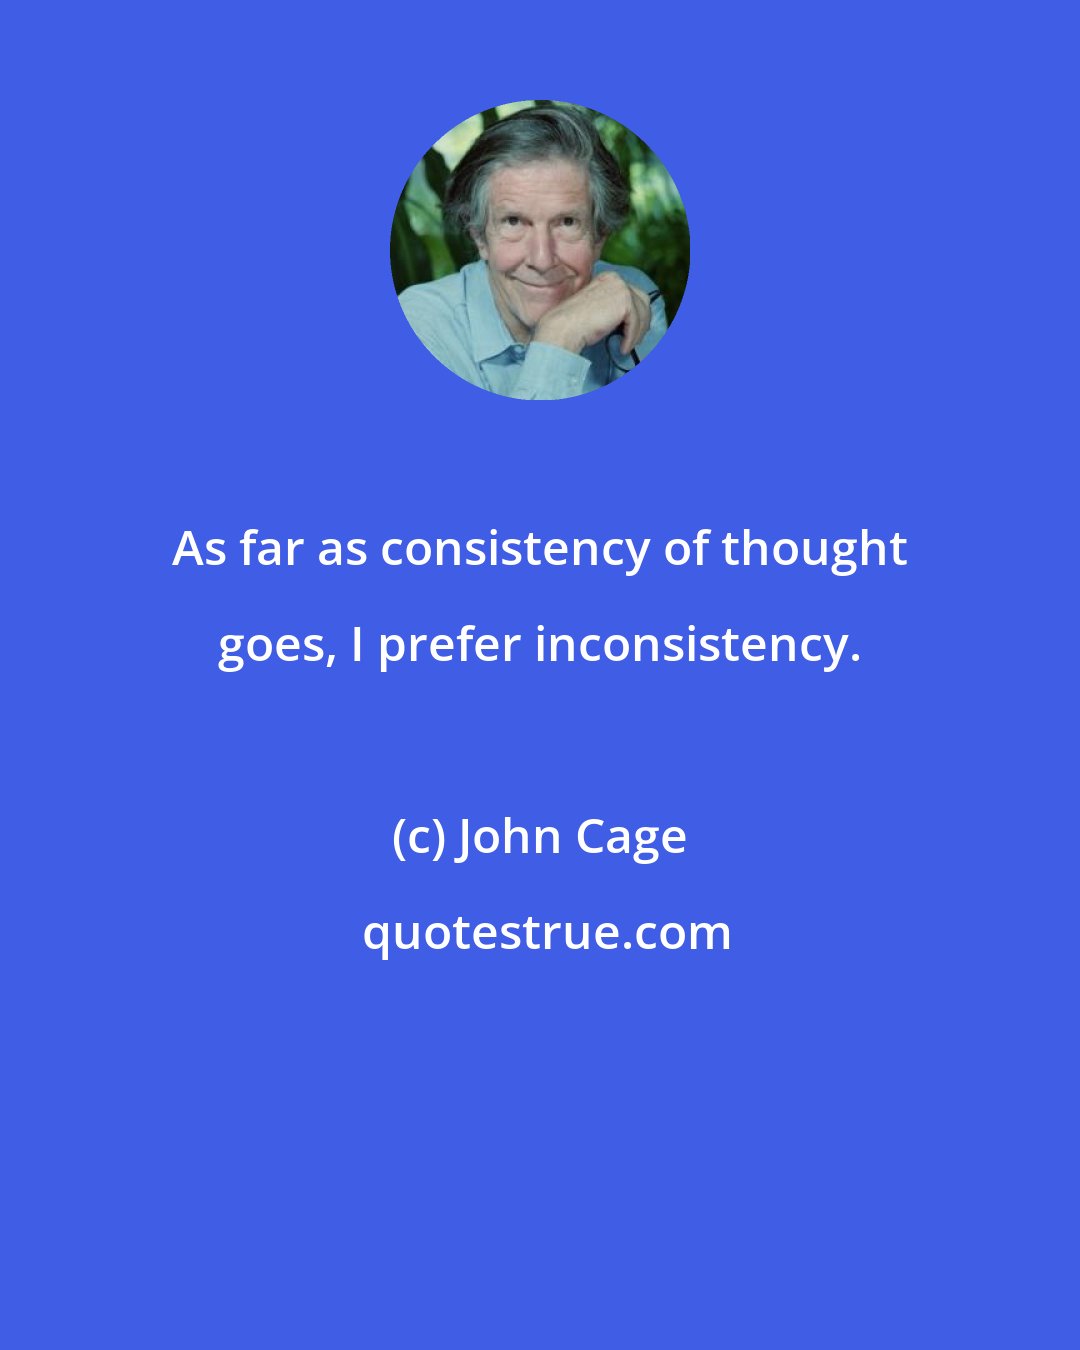 John Cage: As far as consistency of thought goes, I prefer inconsistency.